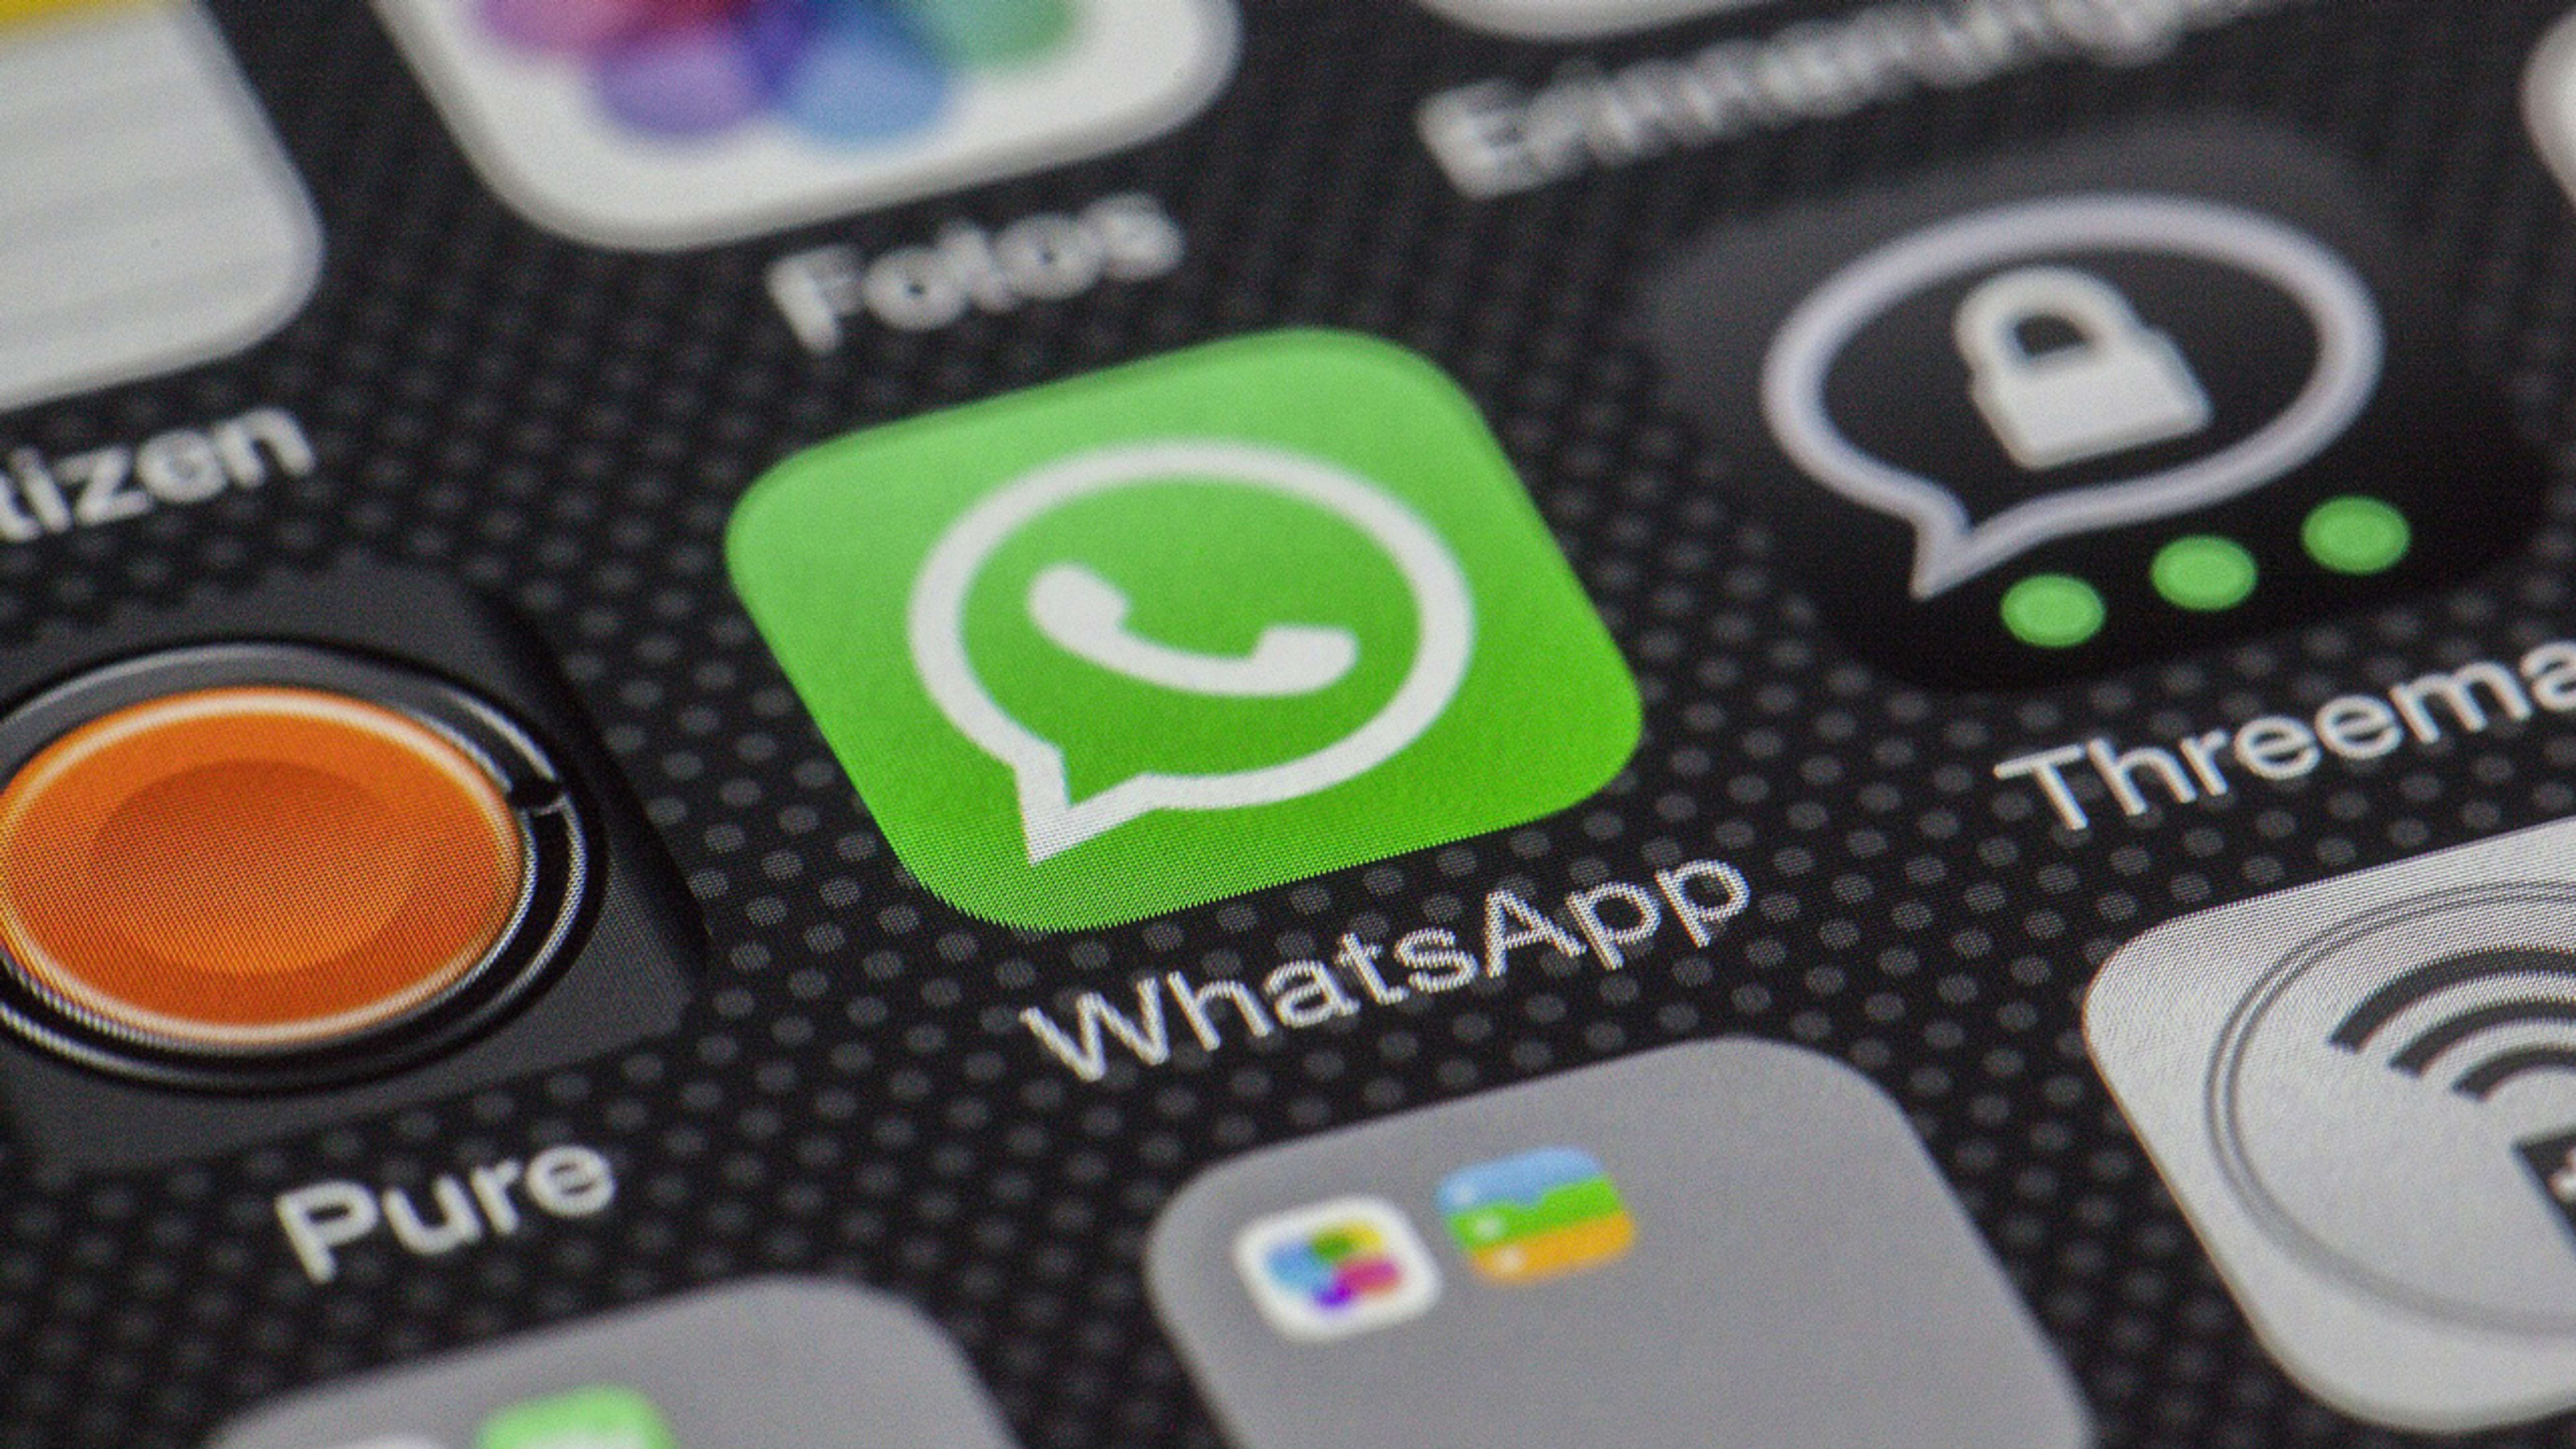 You now need to be at least 16 to use WhatsApp in Europe